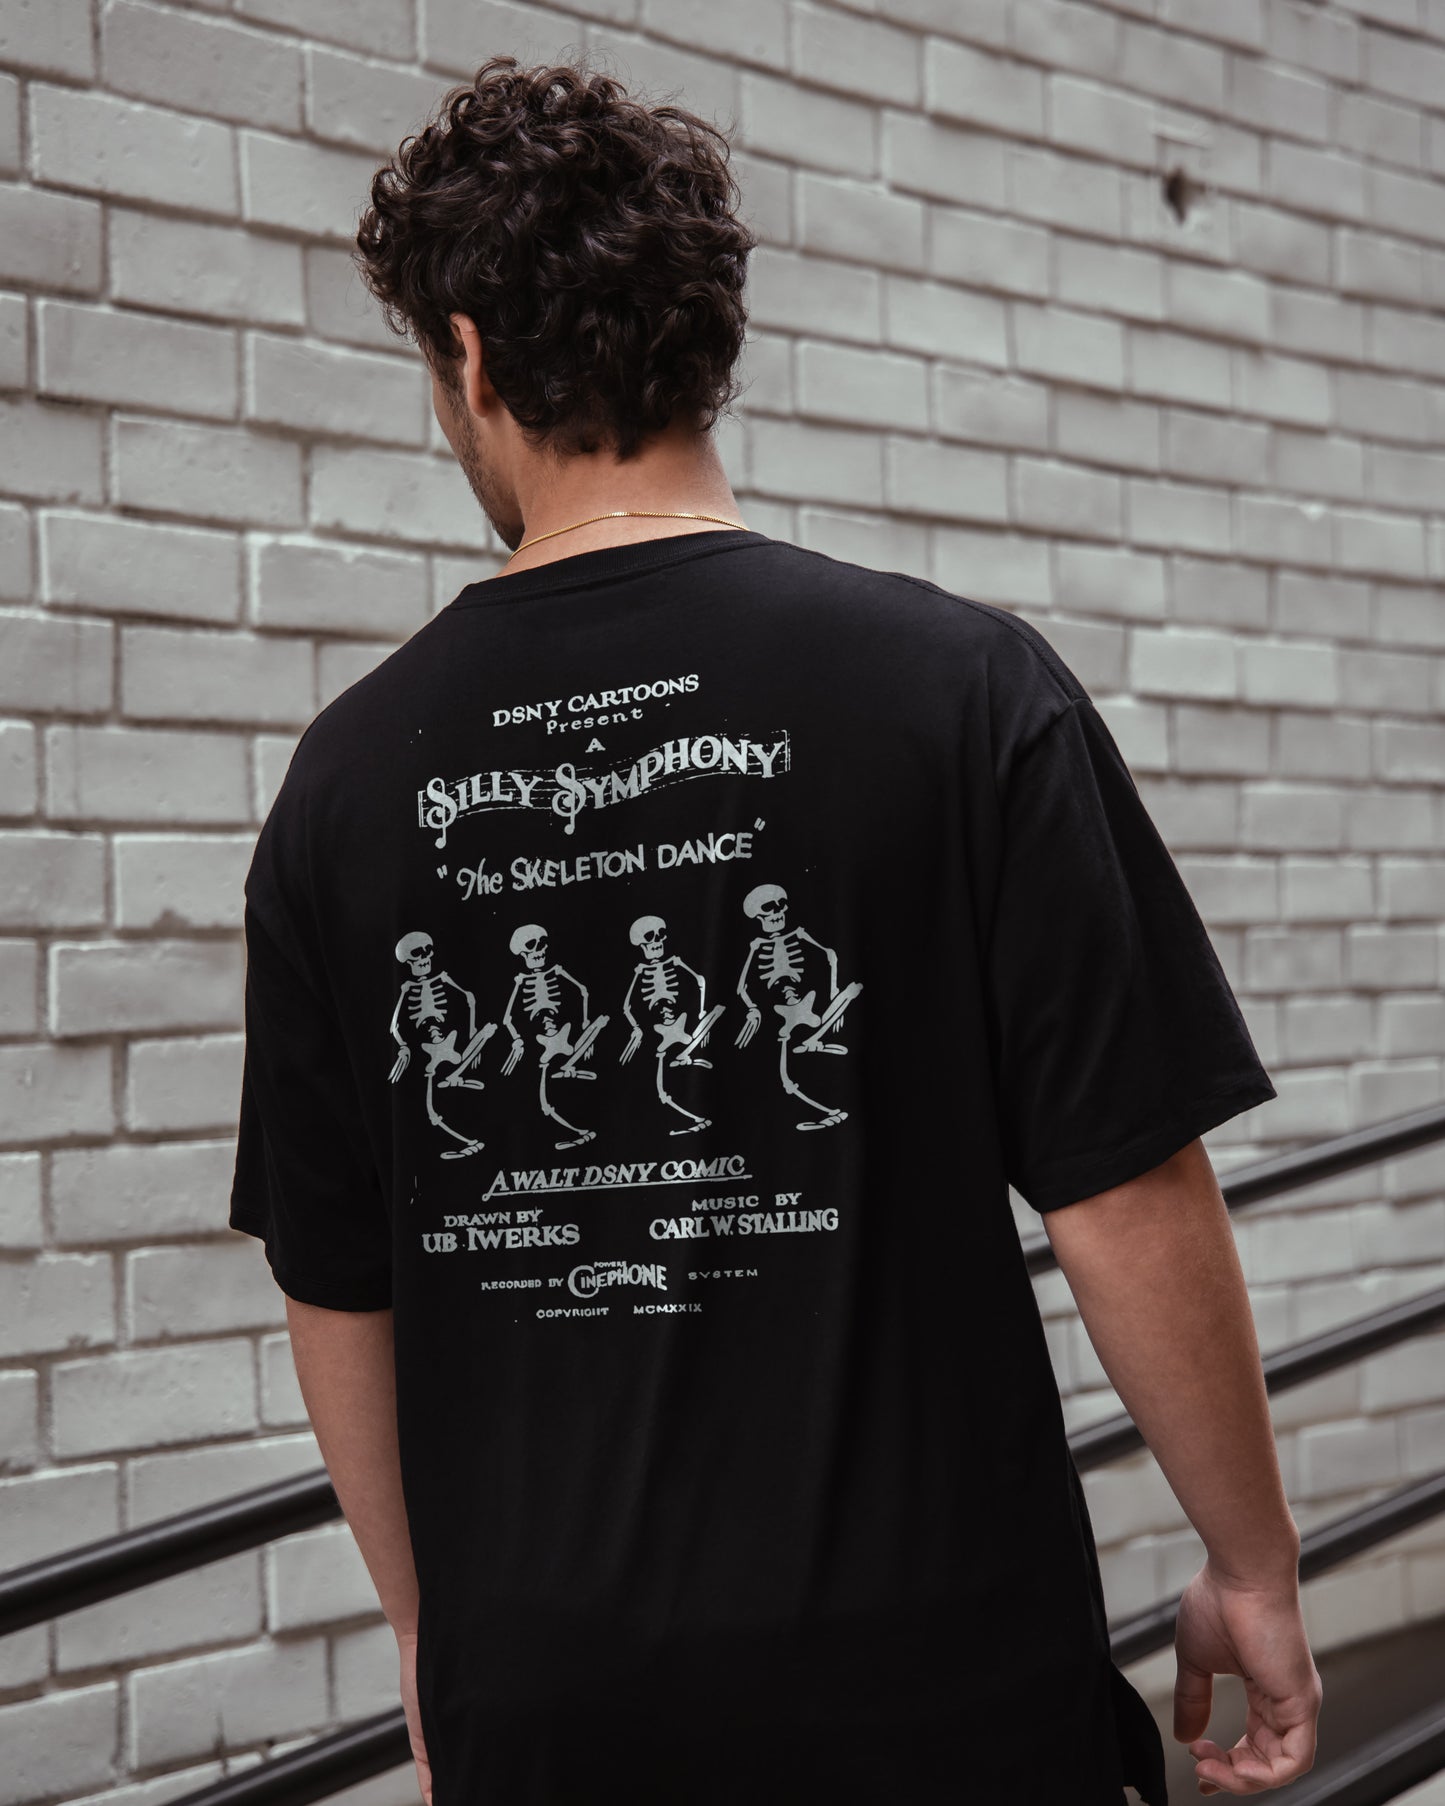 The Silly Symphony Tee